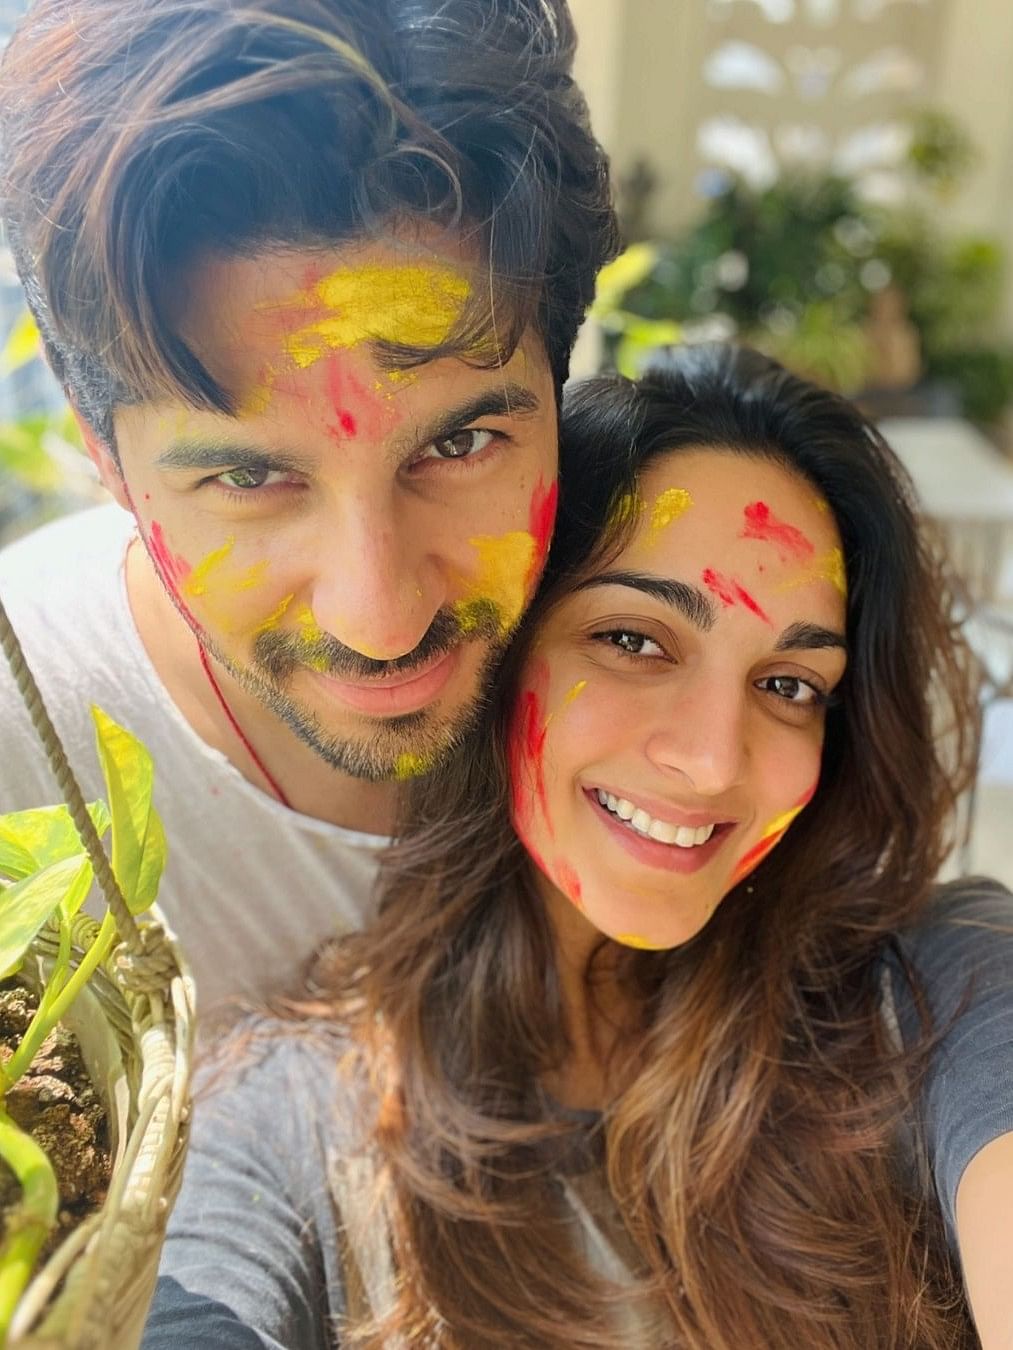 Celebrity couple Sidharth Malhotra and Kaira Advani posted this adorable selfie from their first Holi as husband and wife.